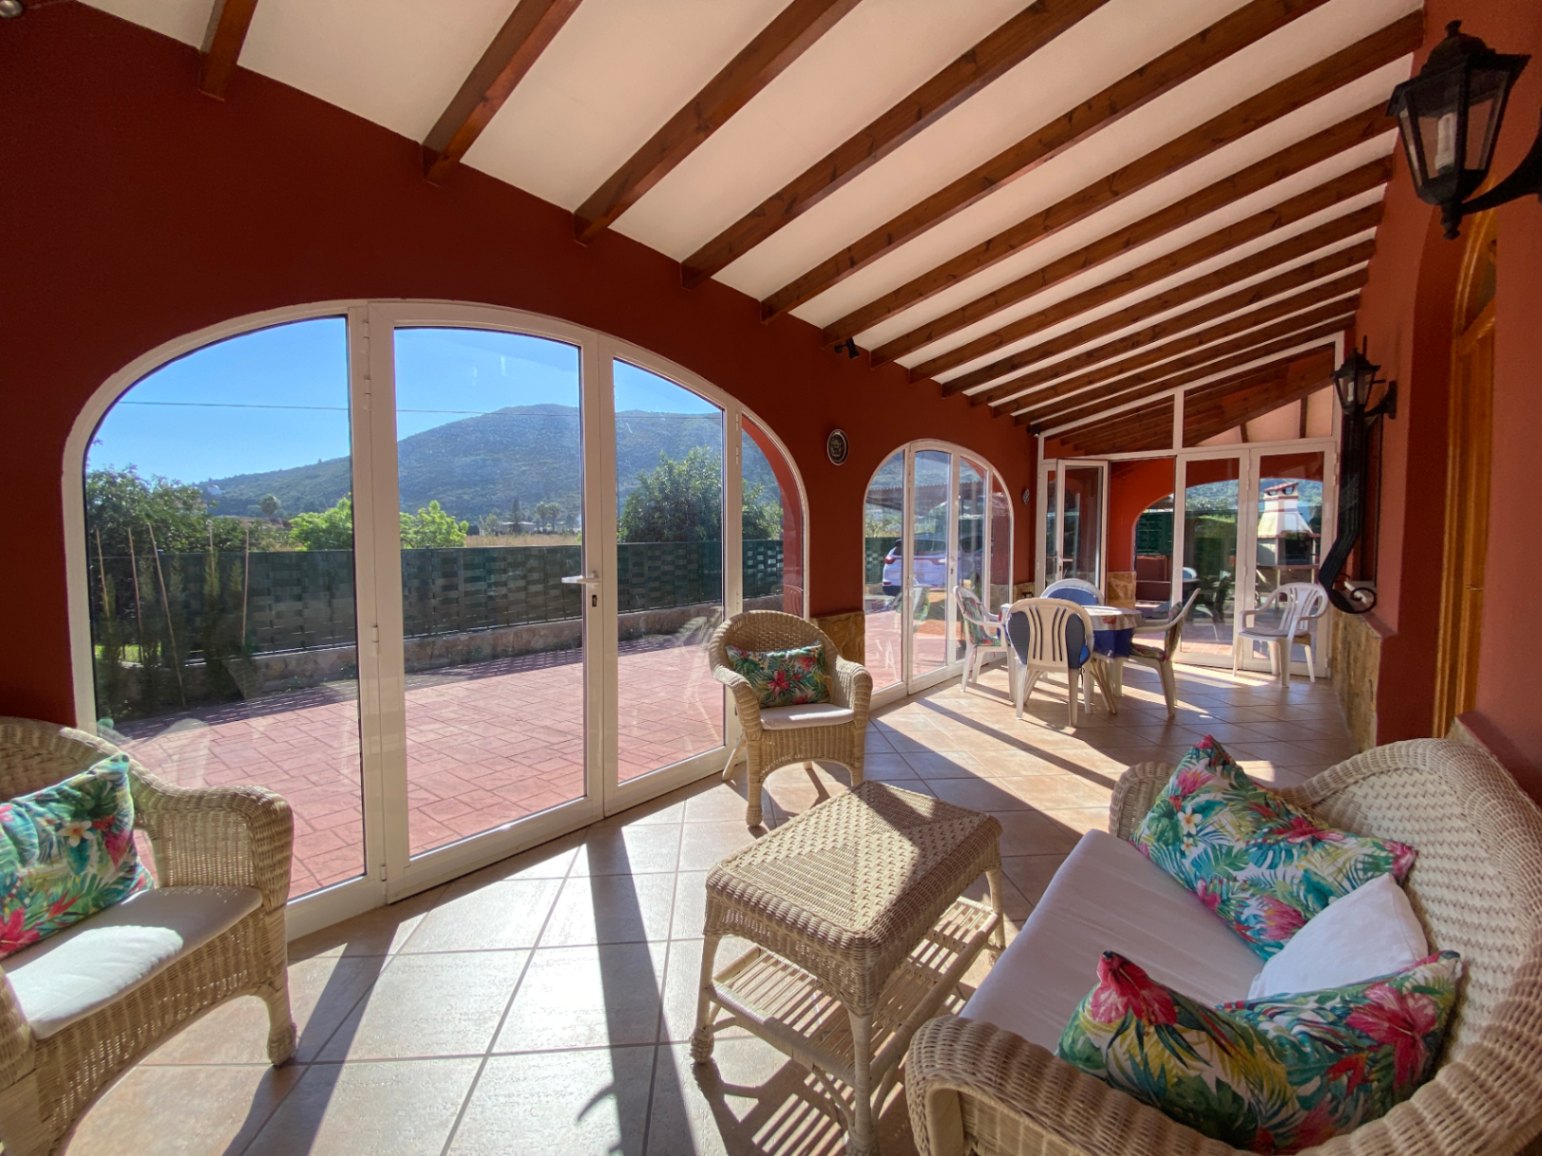 Beautiful Spanish style finca with pool, BB, garage, carport, A/C, close to town.